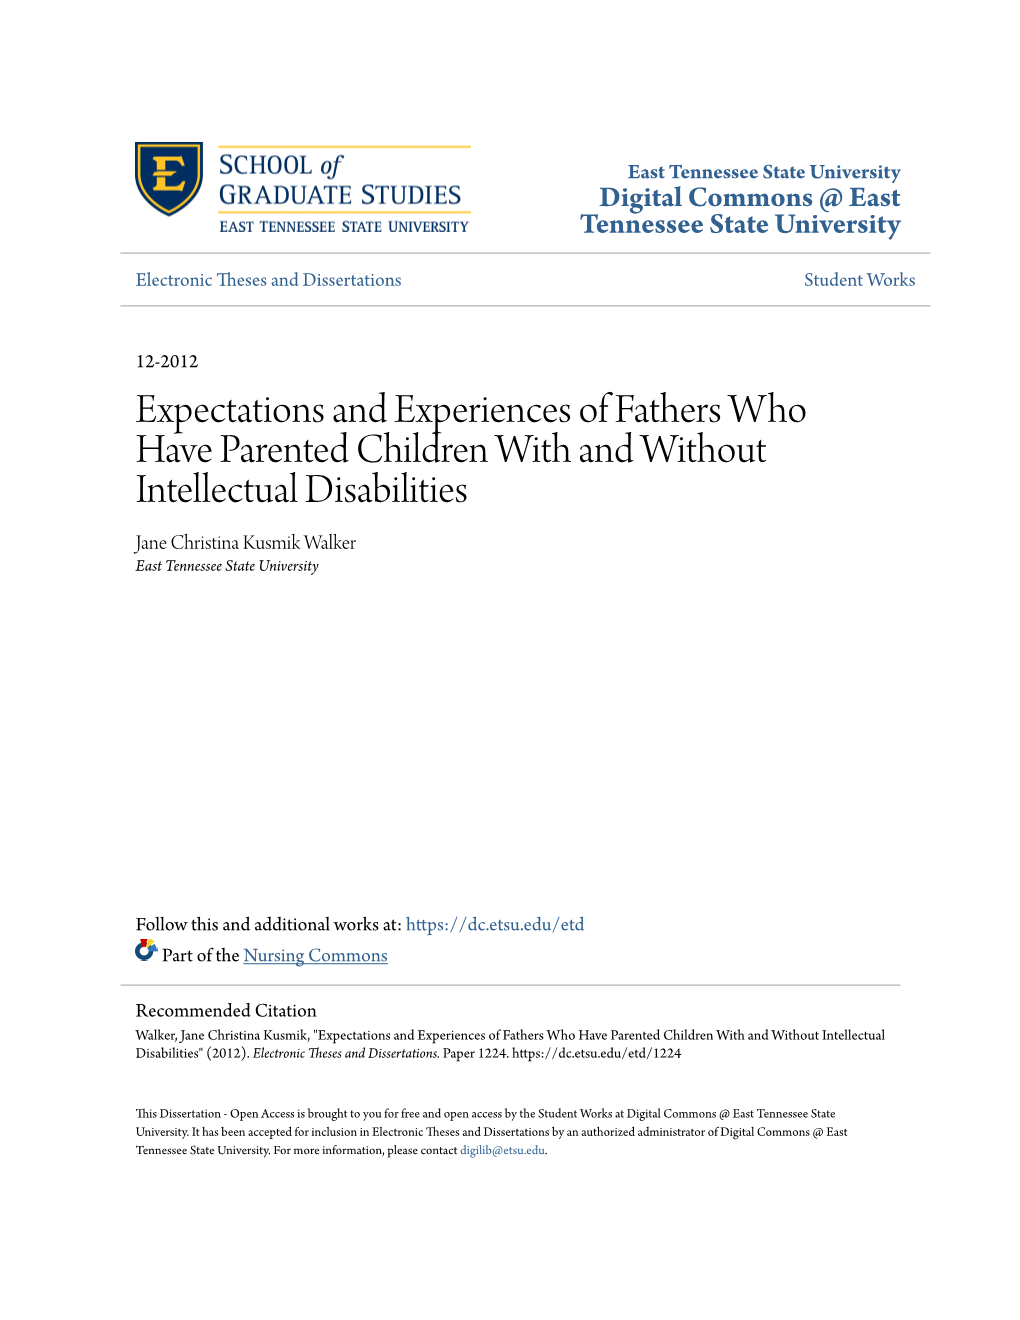 Expectations and Experiences of Fathers Who Have Parented Children with and Without Intellectual Disabilities